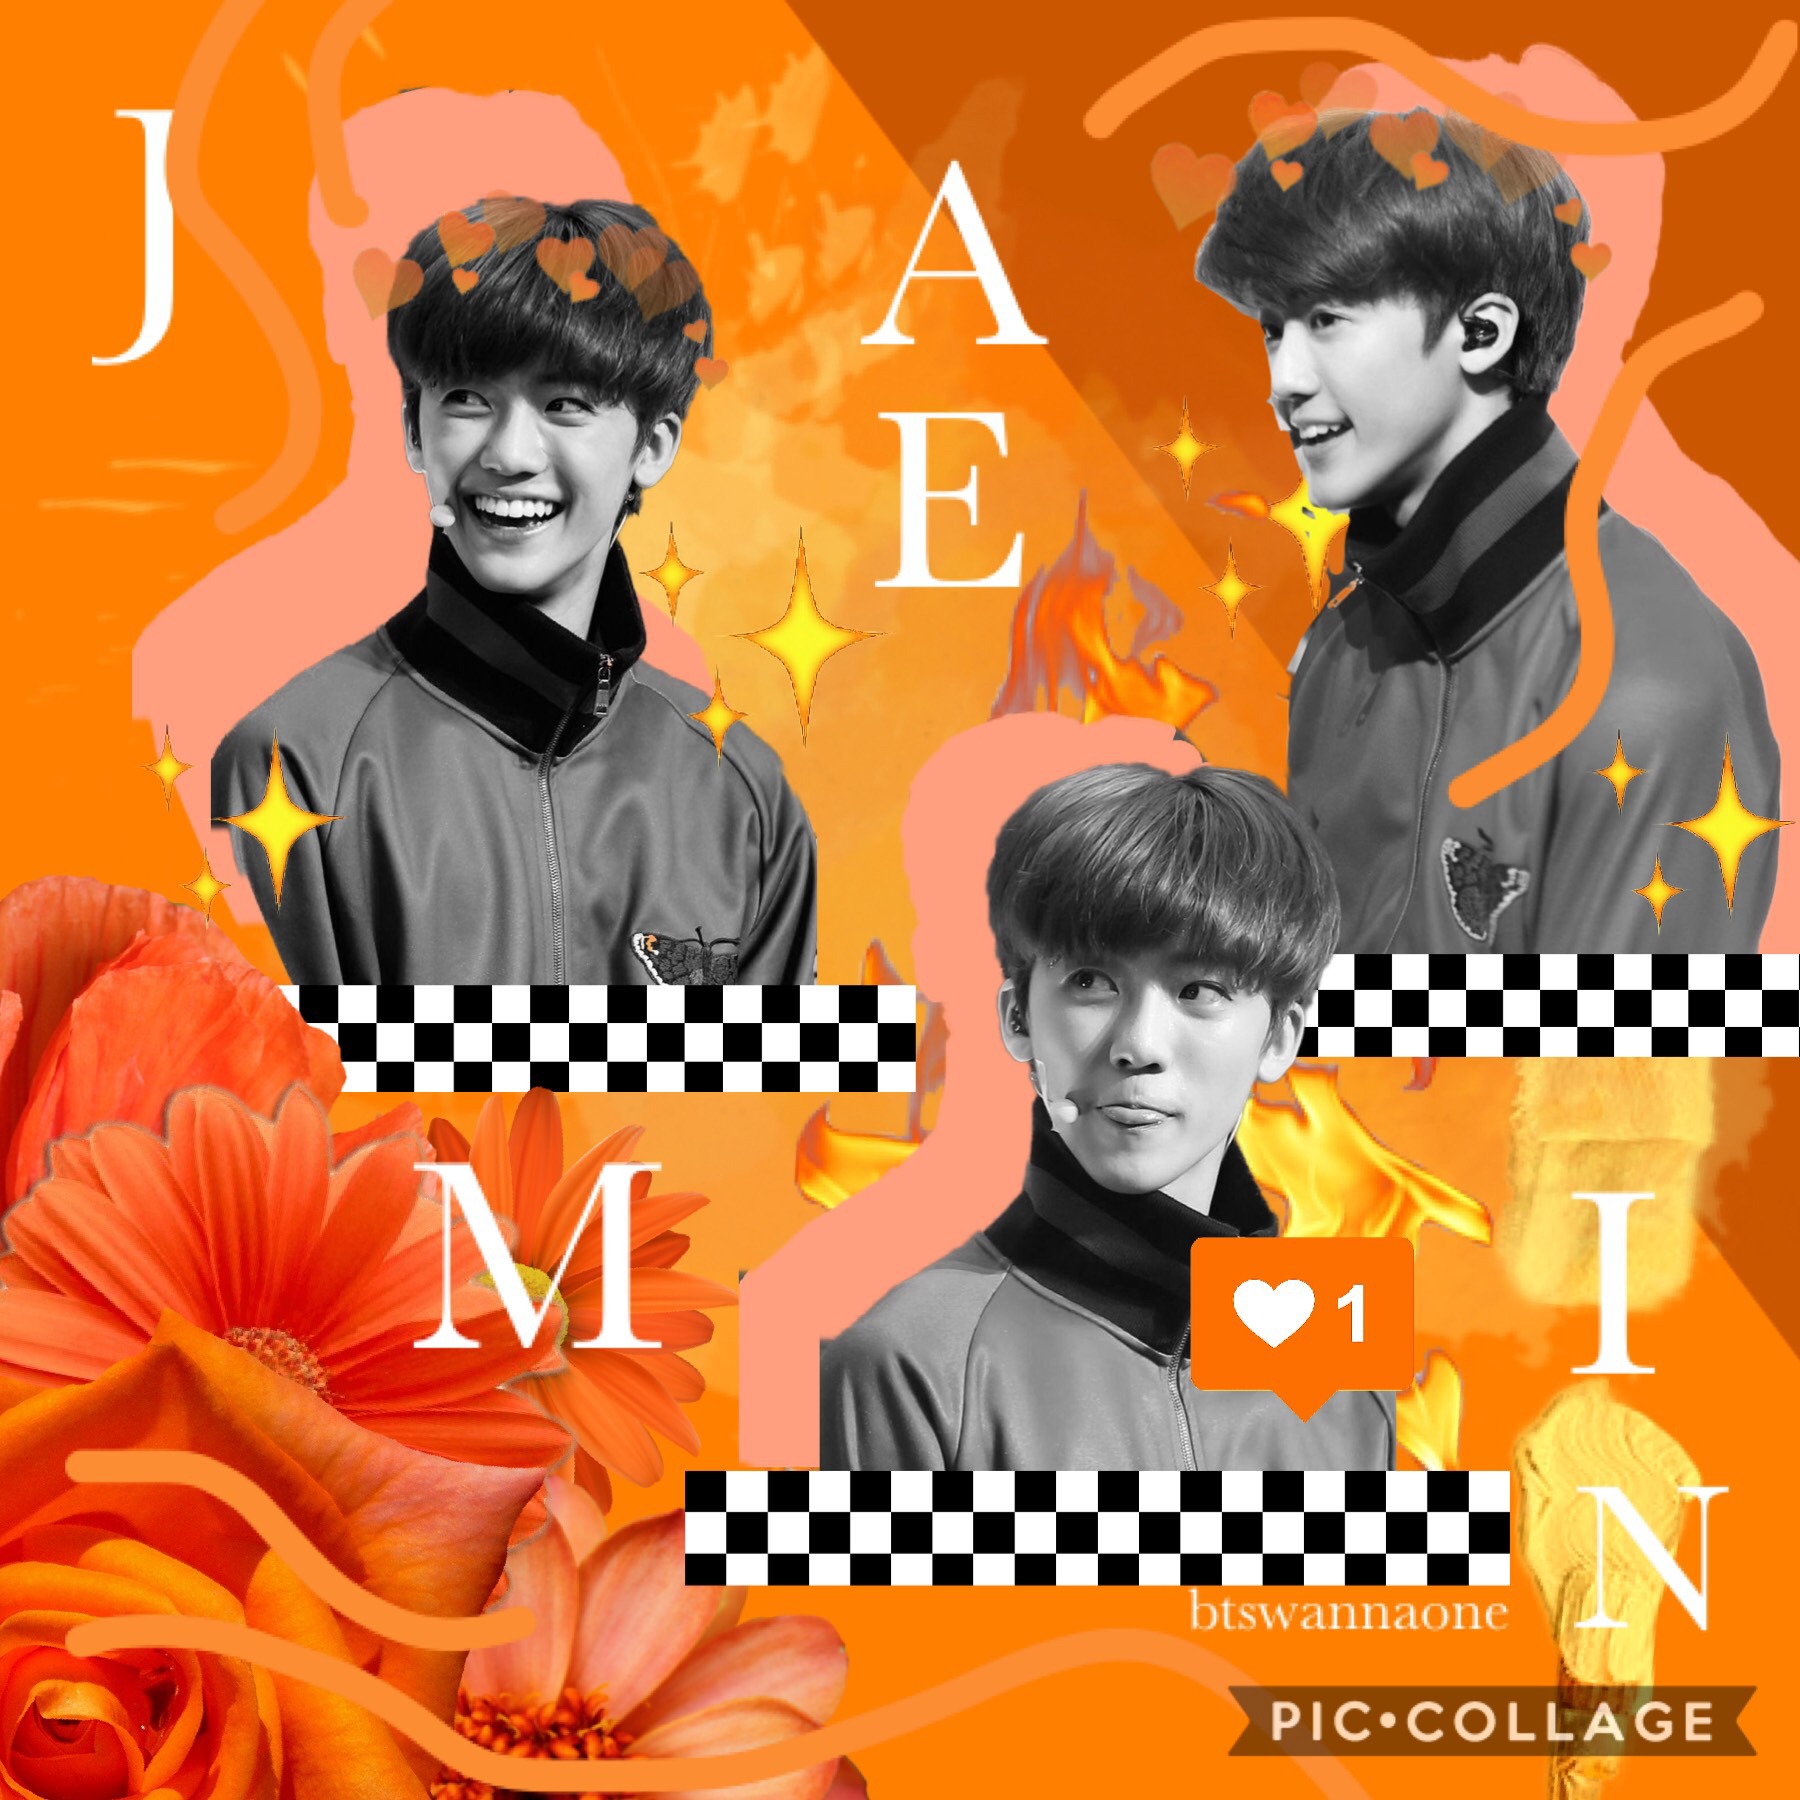 TAP
I rly love nct dream so why not.
Jaemin edit. My favorites are: Jaemin, Jisung, and Mark!